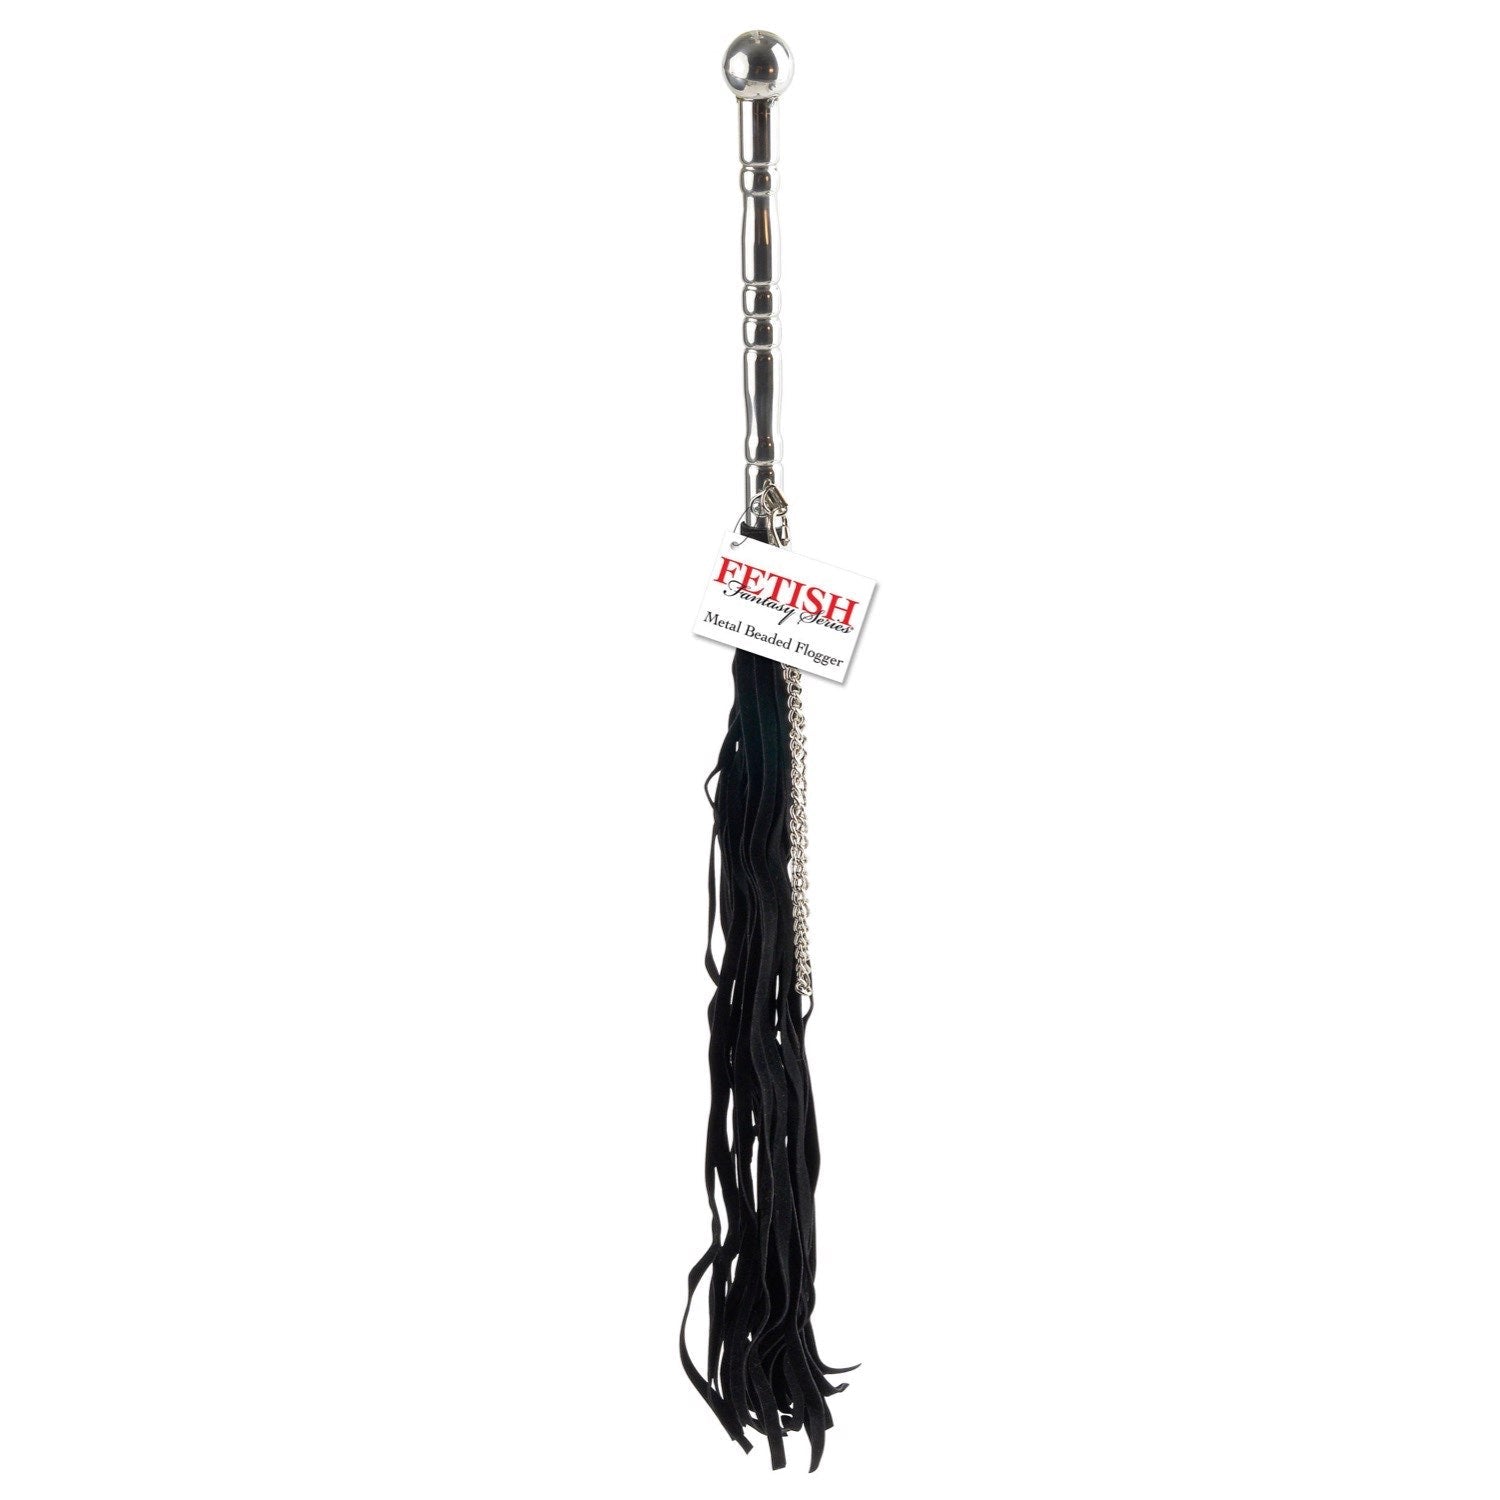  Beaded Metal Flogger - Black 60 cm Whip by Pipedream